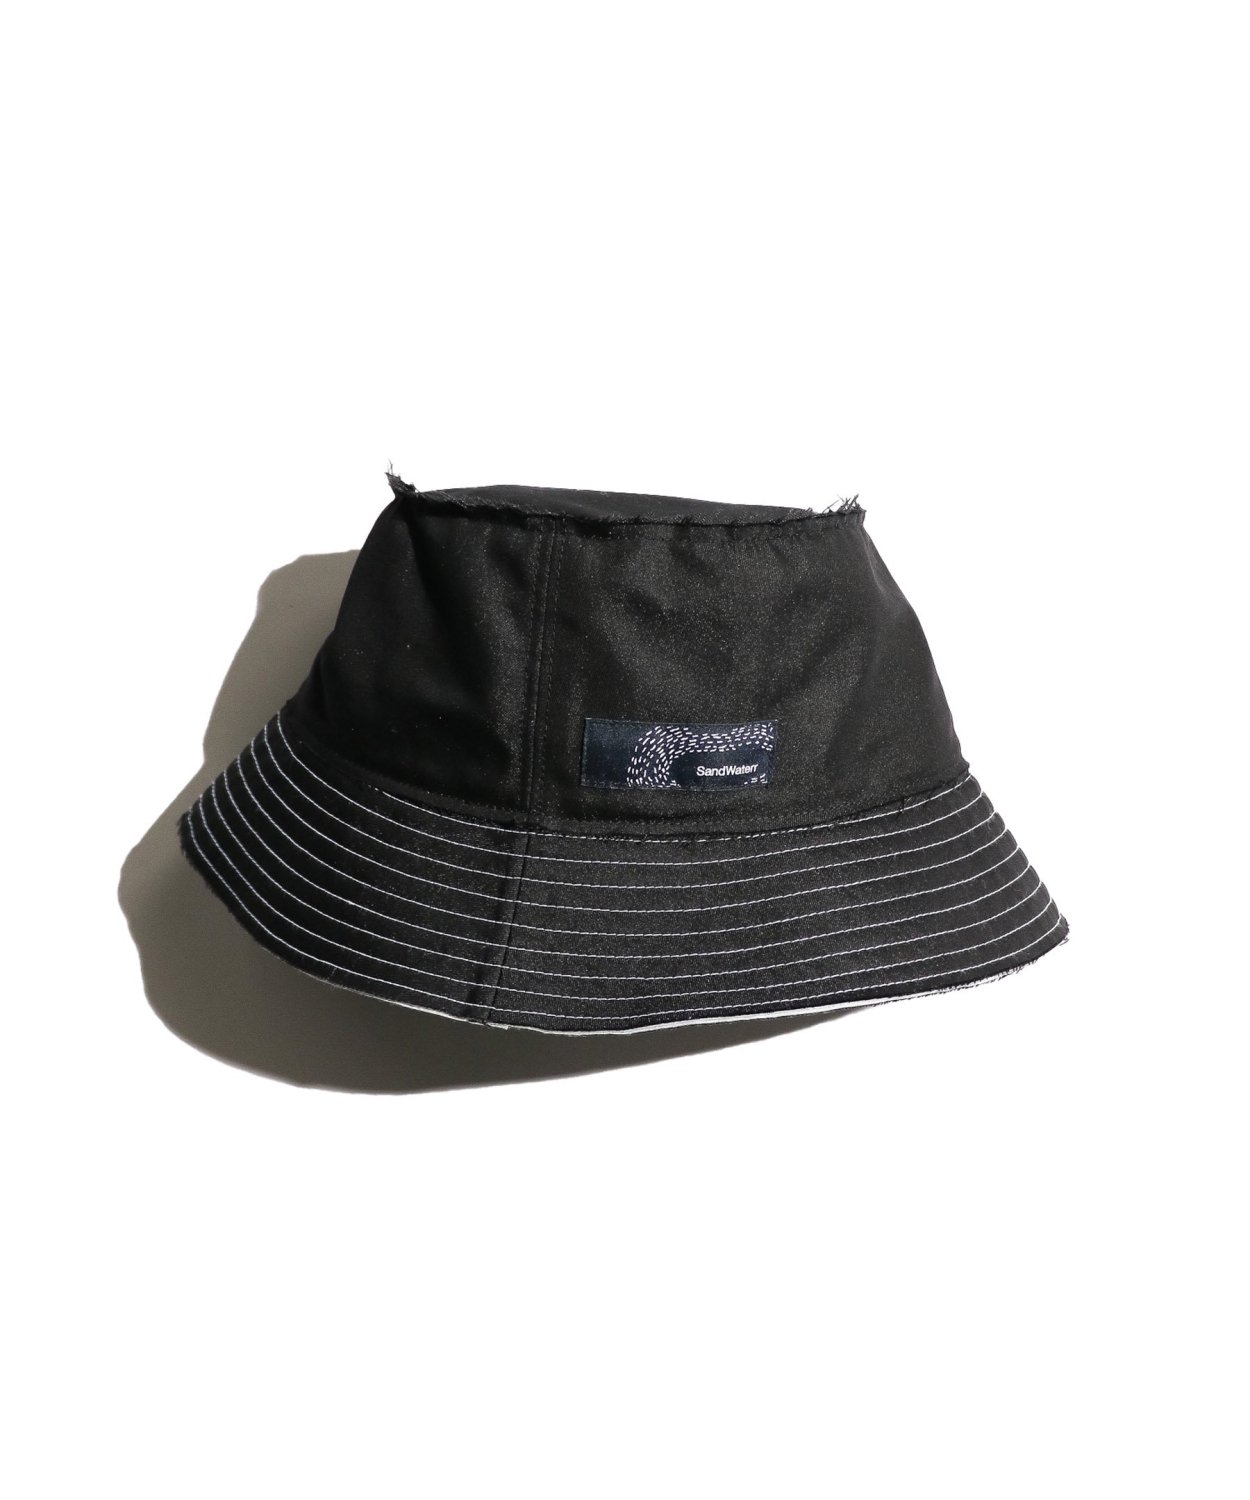 SandWaterr / RESEARCHED HAT  T/C TWILL